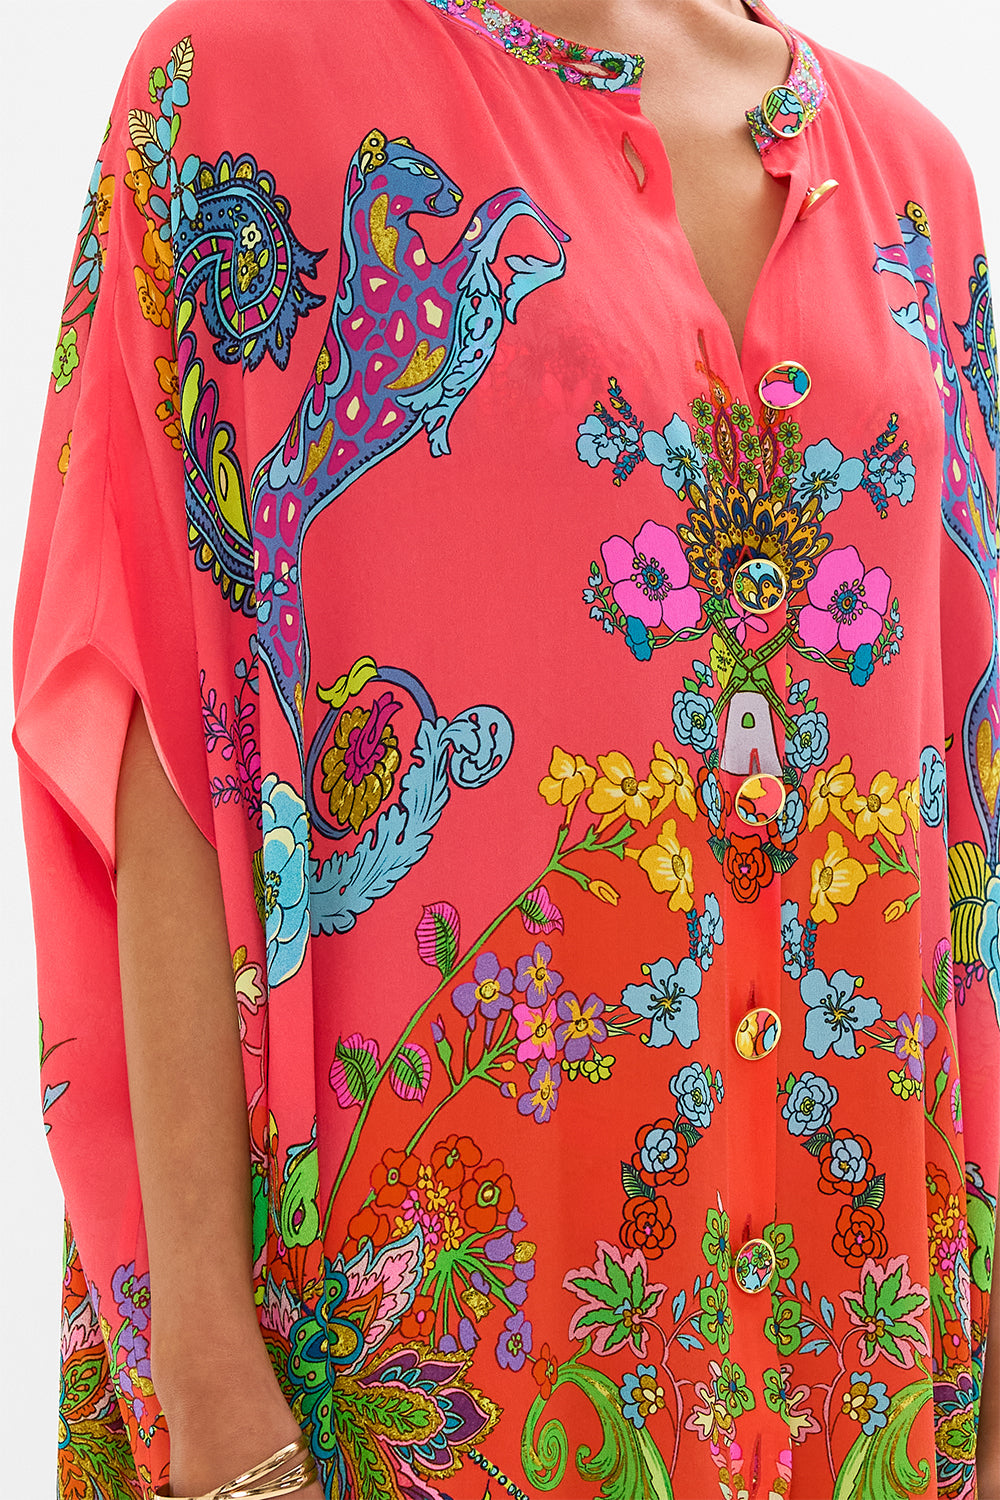 CAMILLA floral silk shrug in Stitched in Time print.